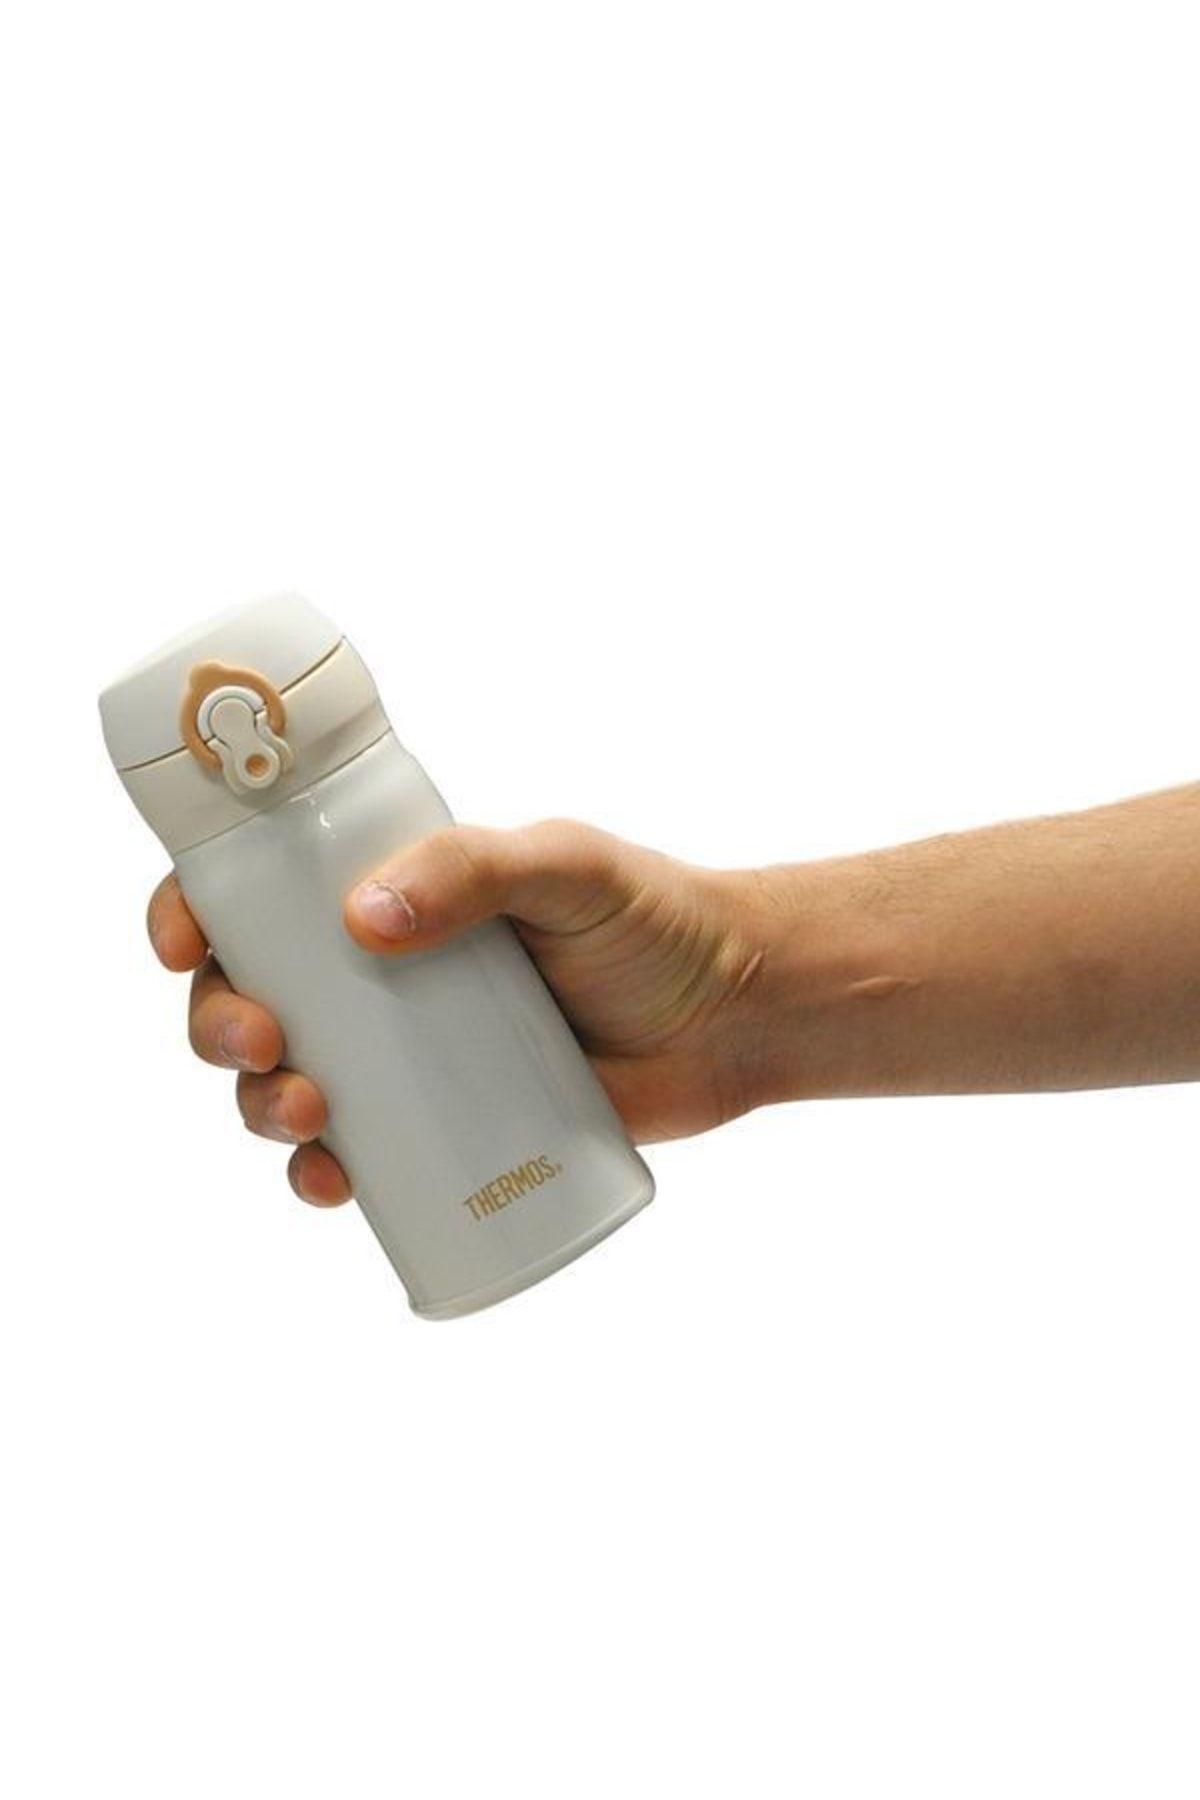 Thermos Water Bottle Vacuum Insulated Mobile Mug [one-touch Open Type] 350ml Creamy Gold JNL-353 CRG